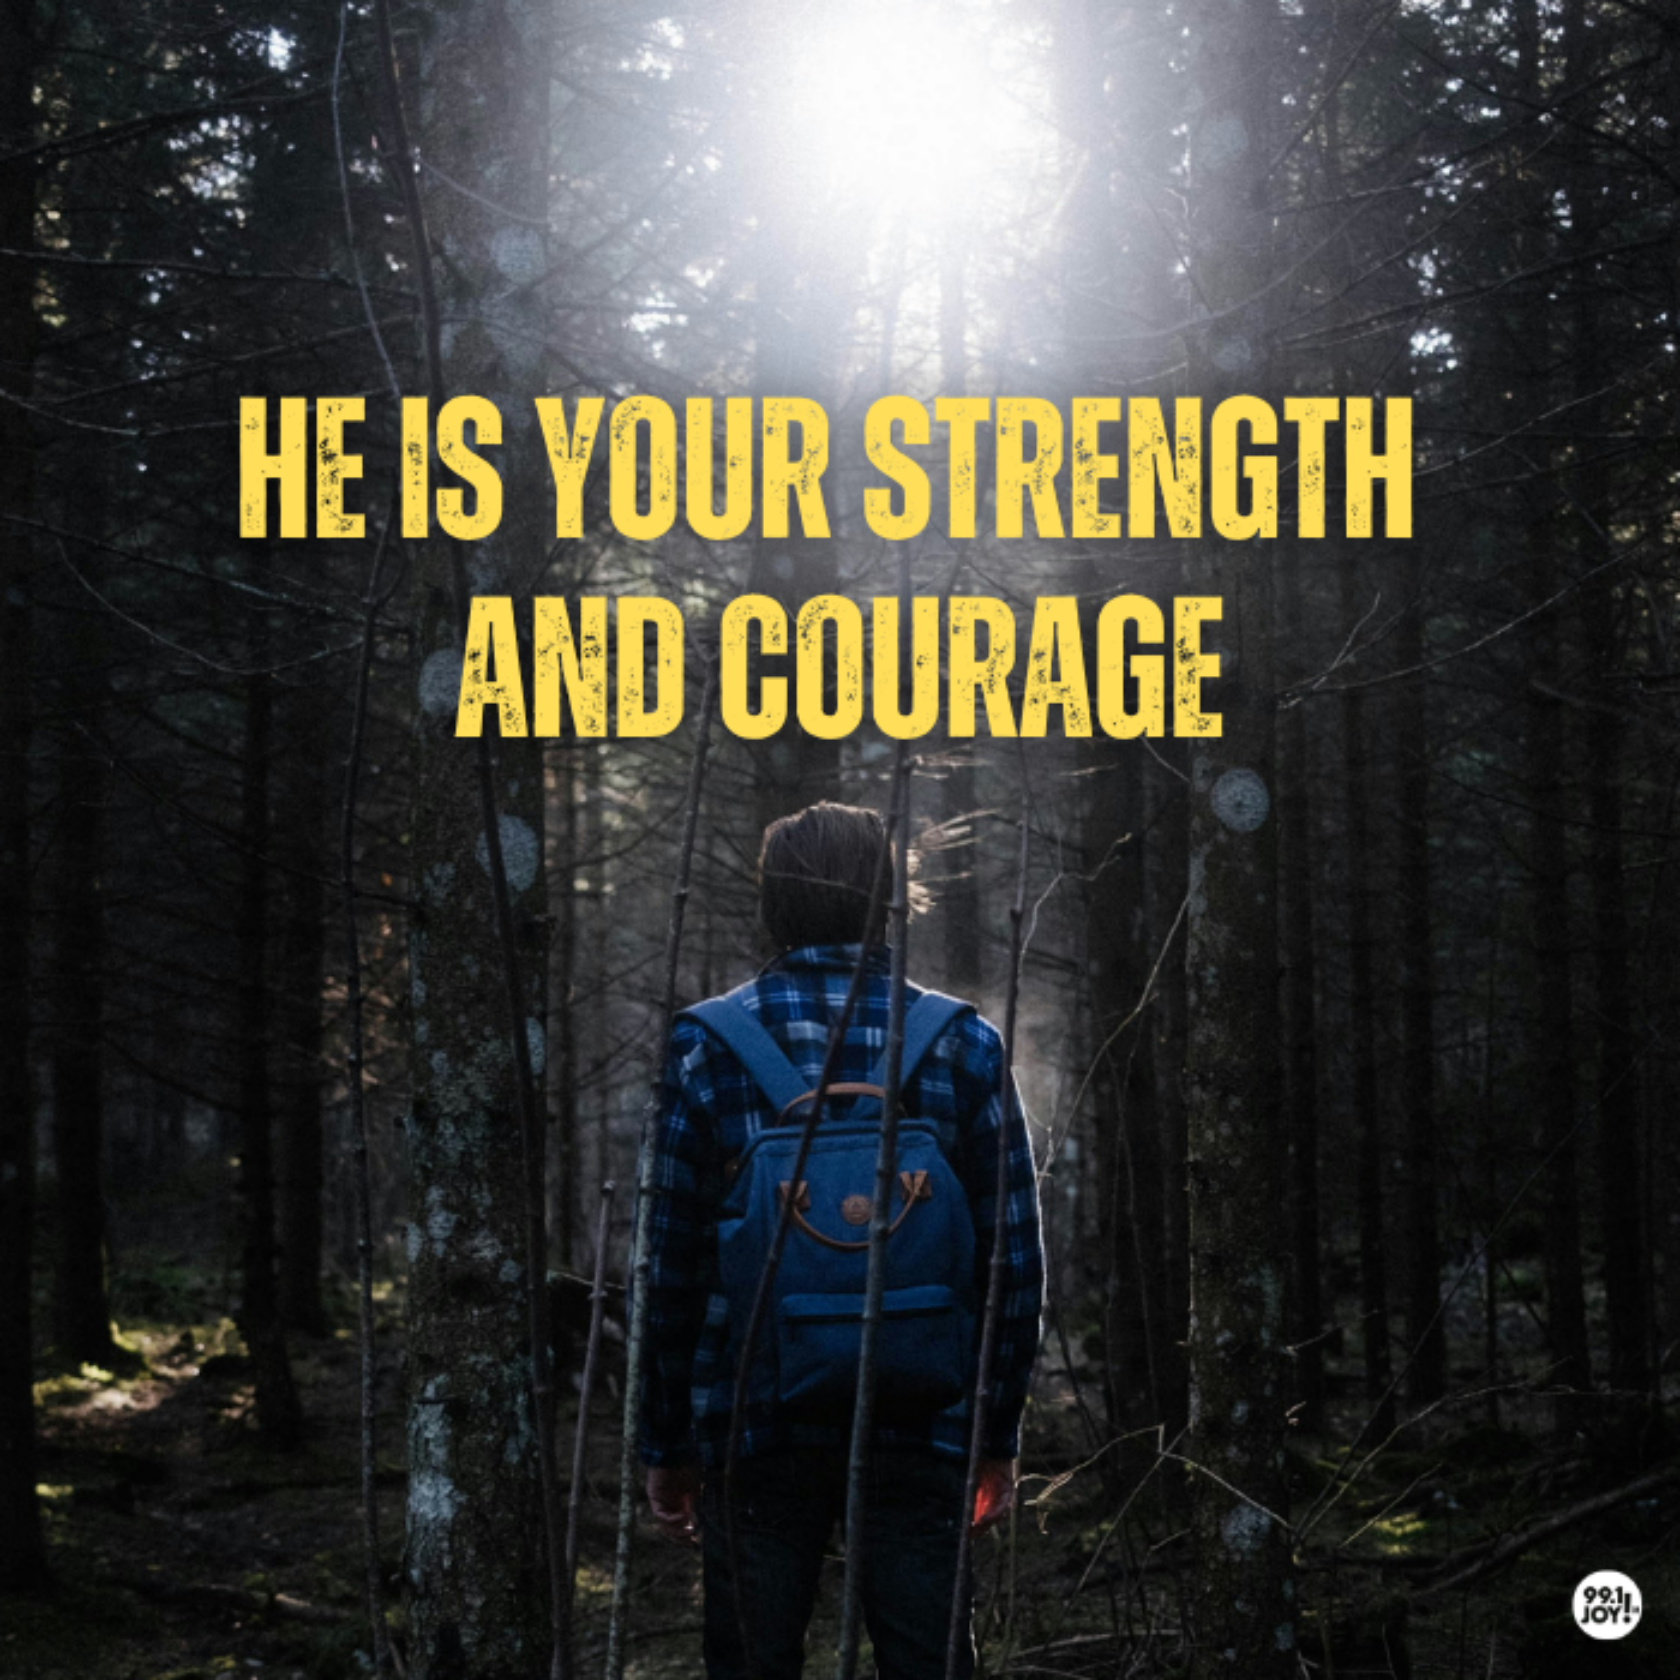 He Is Your Strength and Courage